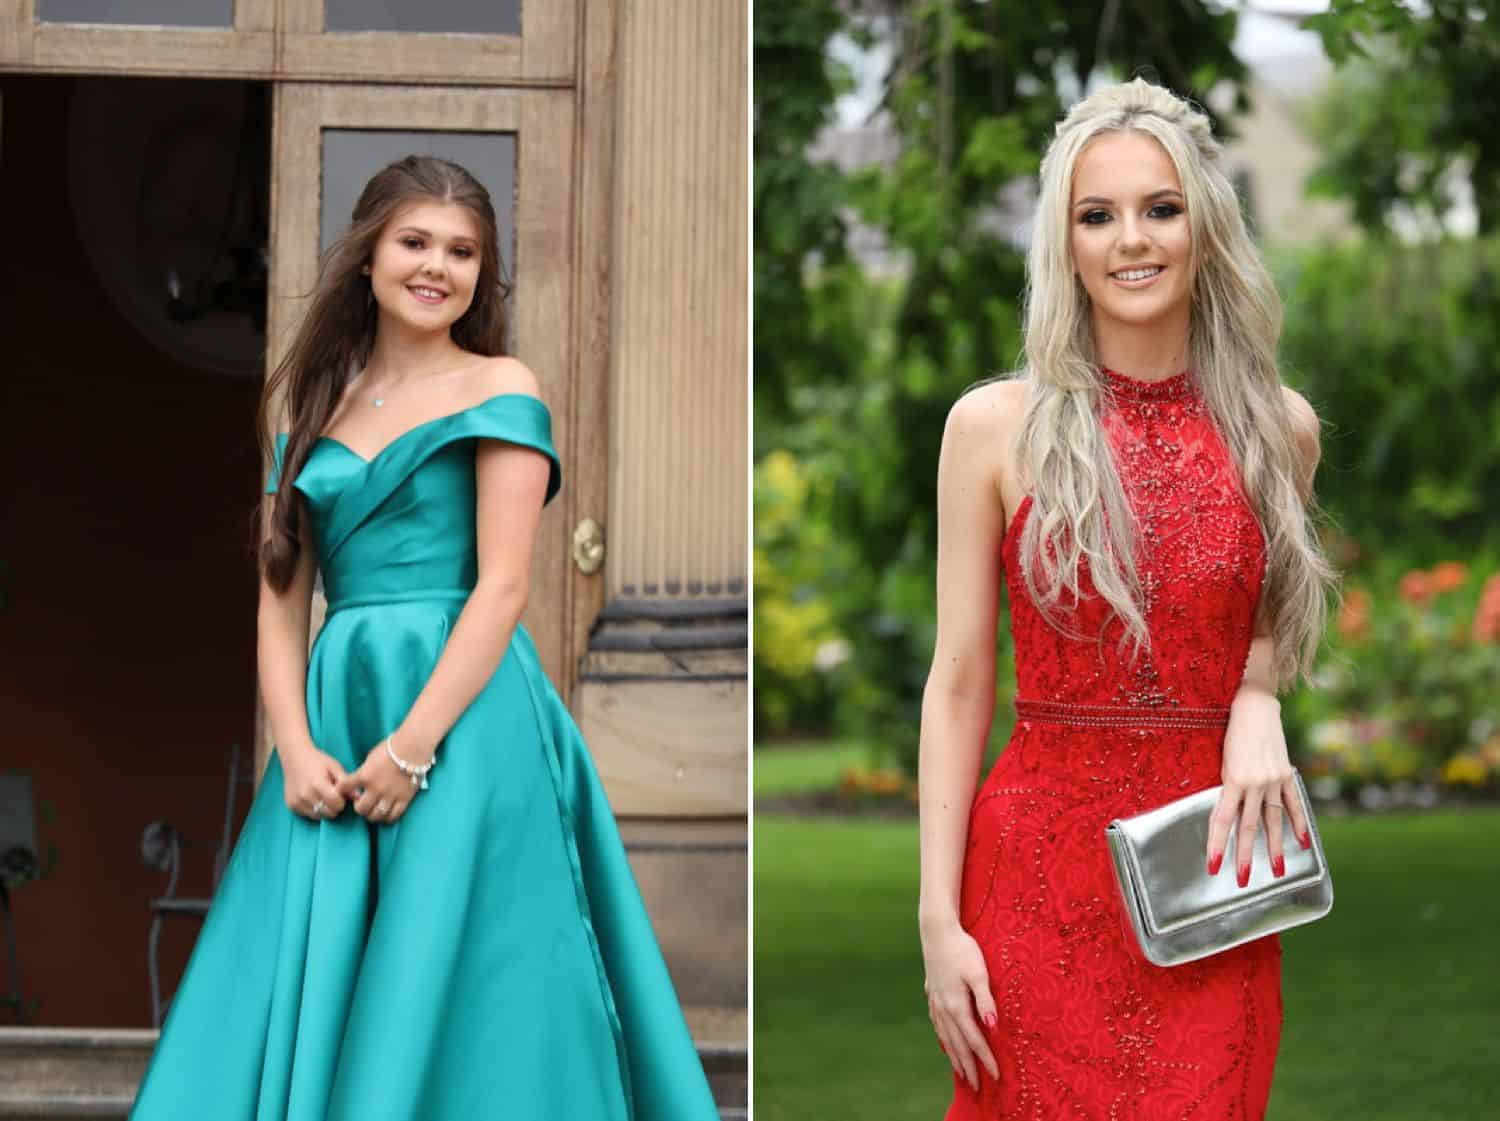 Two high school senior girls dressed for their prom photography.